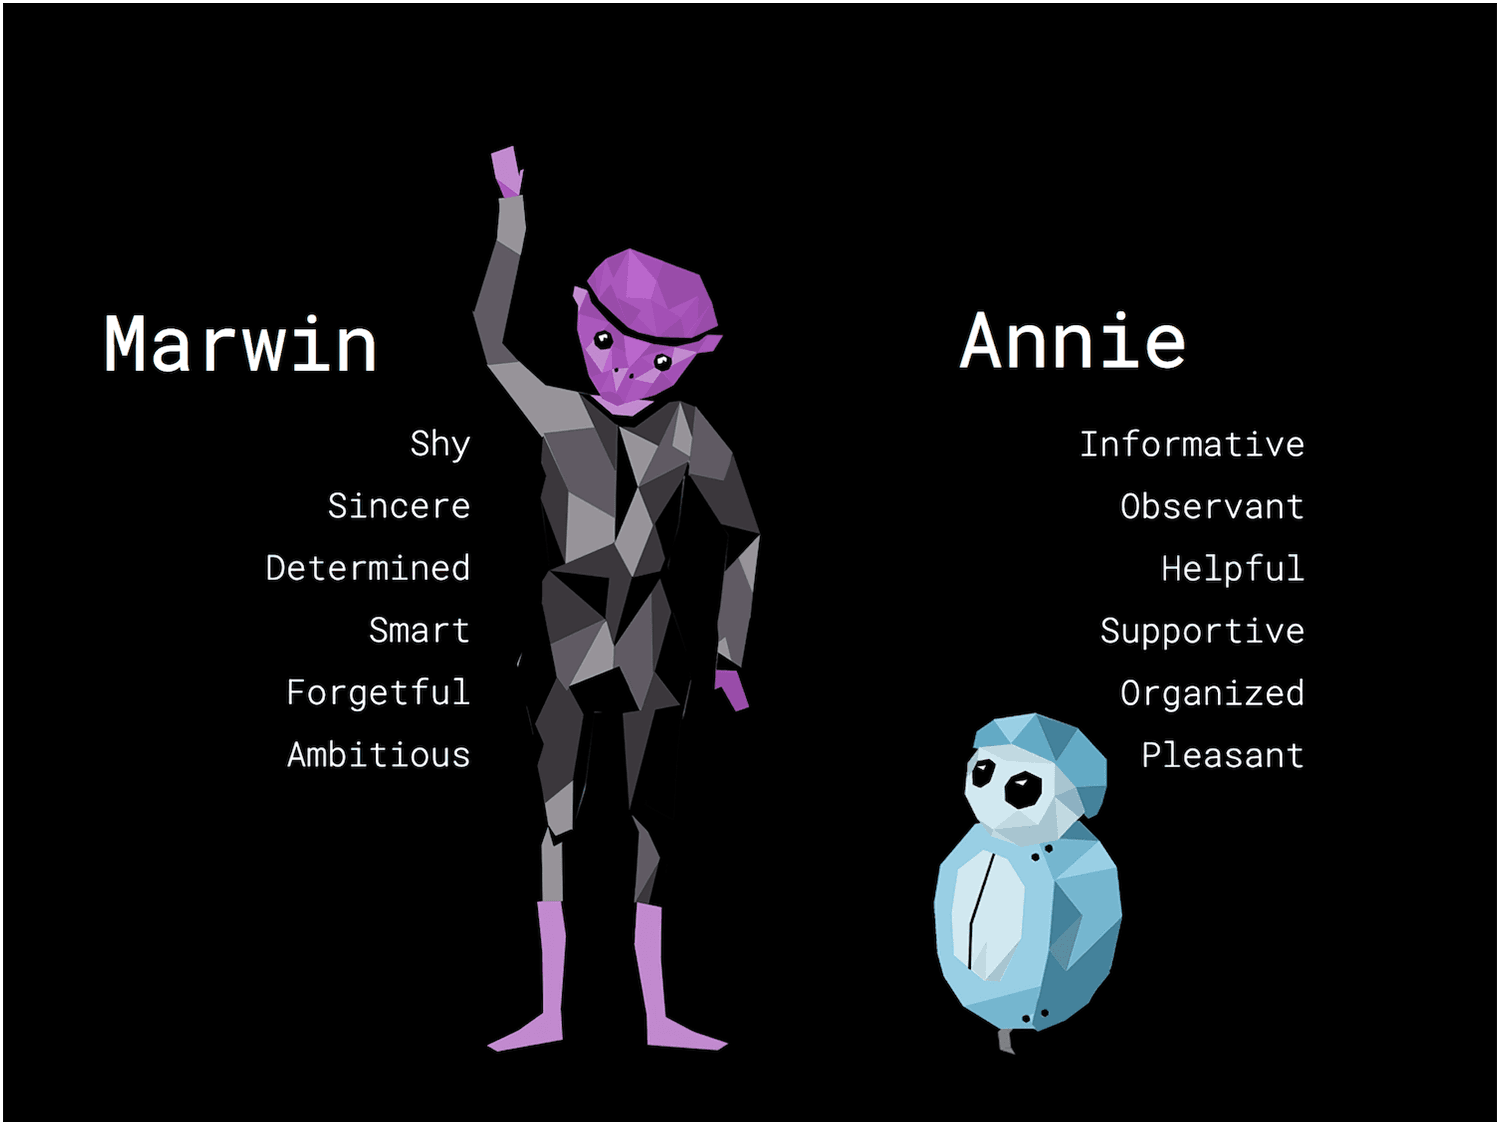 Two animated characters (a purple alien and a blue robot) on a solid black background